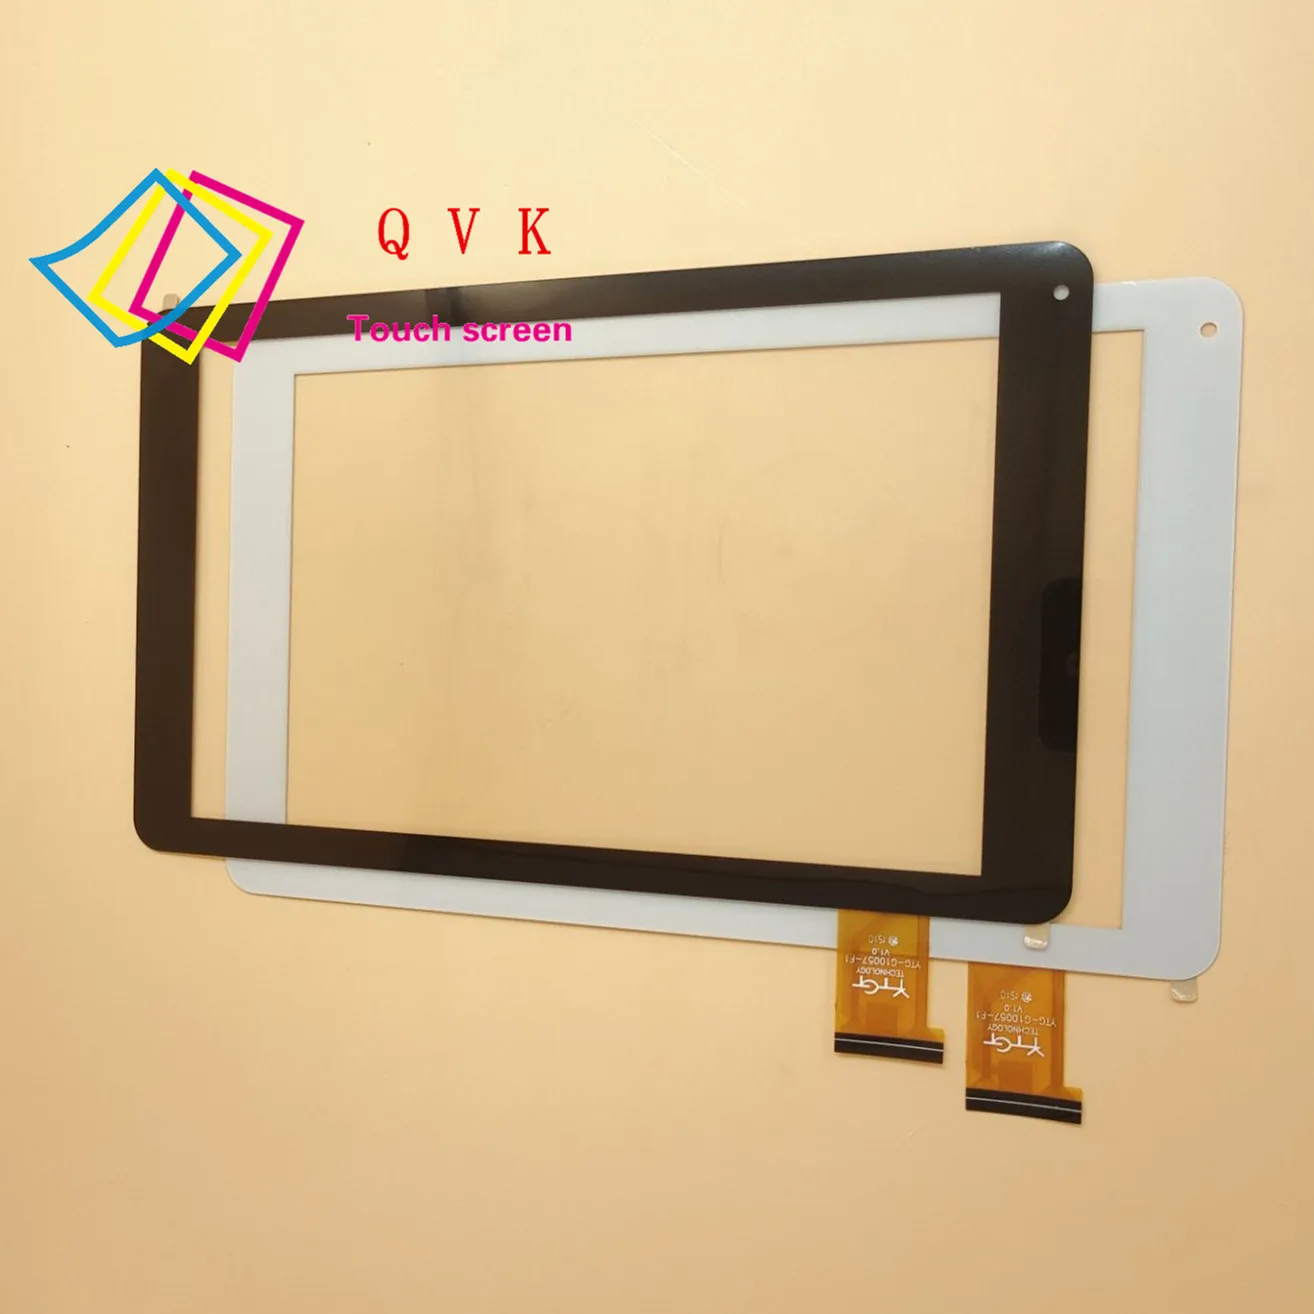 

10.1inch touch screen P/N YTG-G10057-F1 F4 V1.0 Capacitive touch screen panel repair and replacement parts